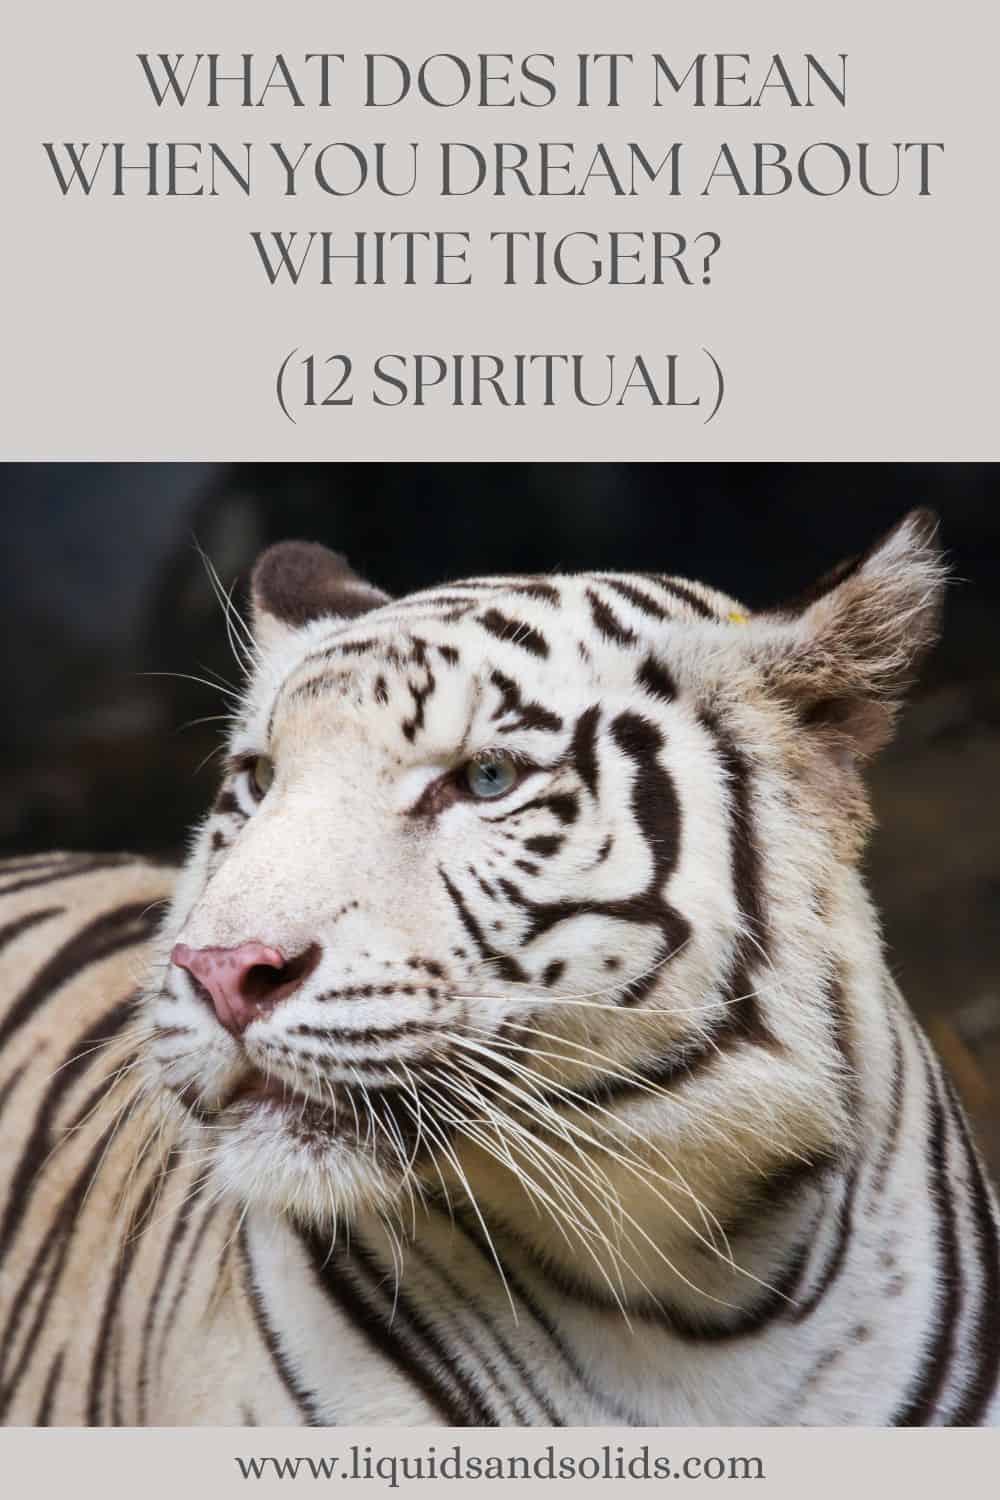 What Does It Mean When You Dream About White Tiger? (12 Spiritual)